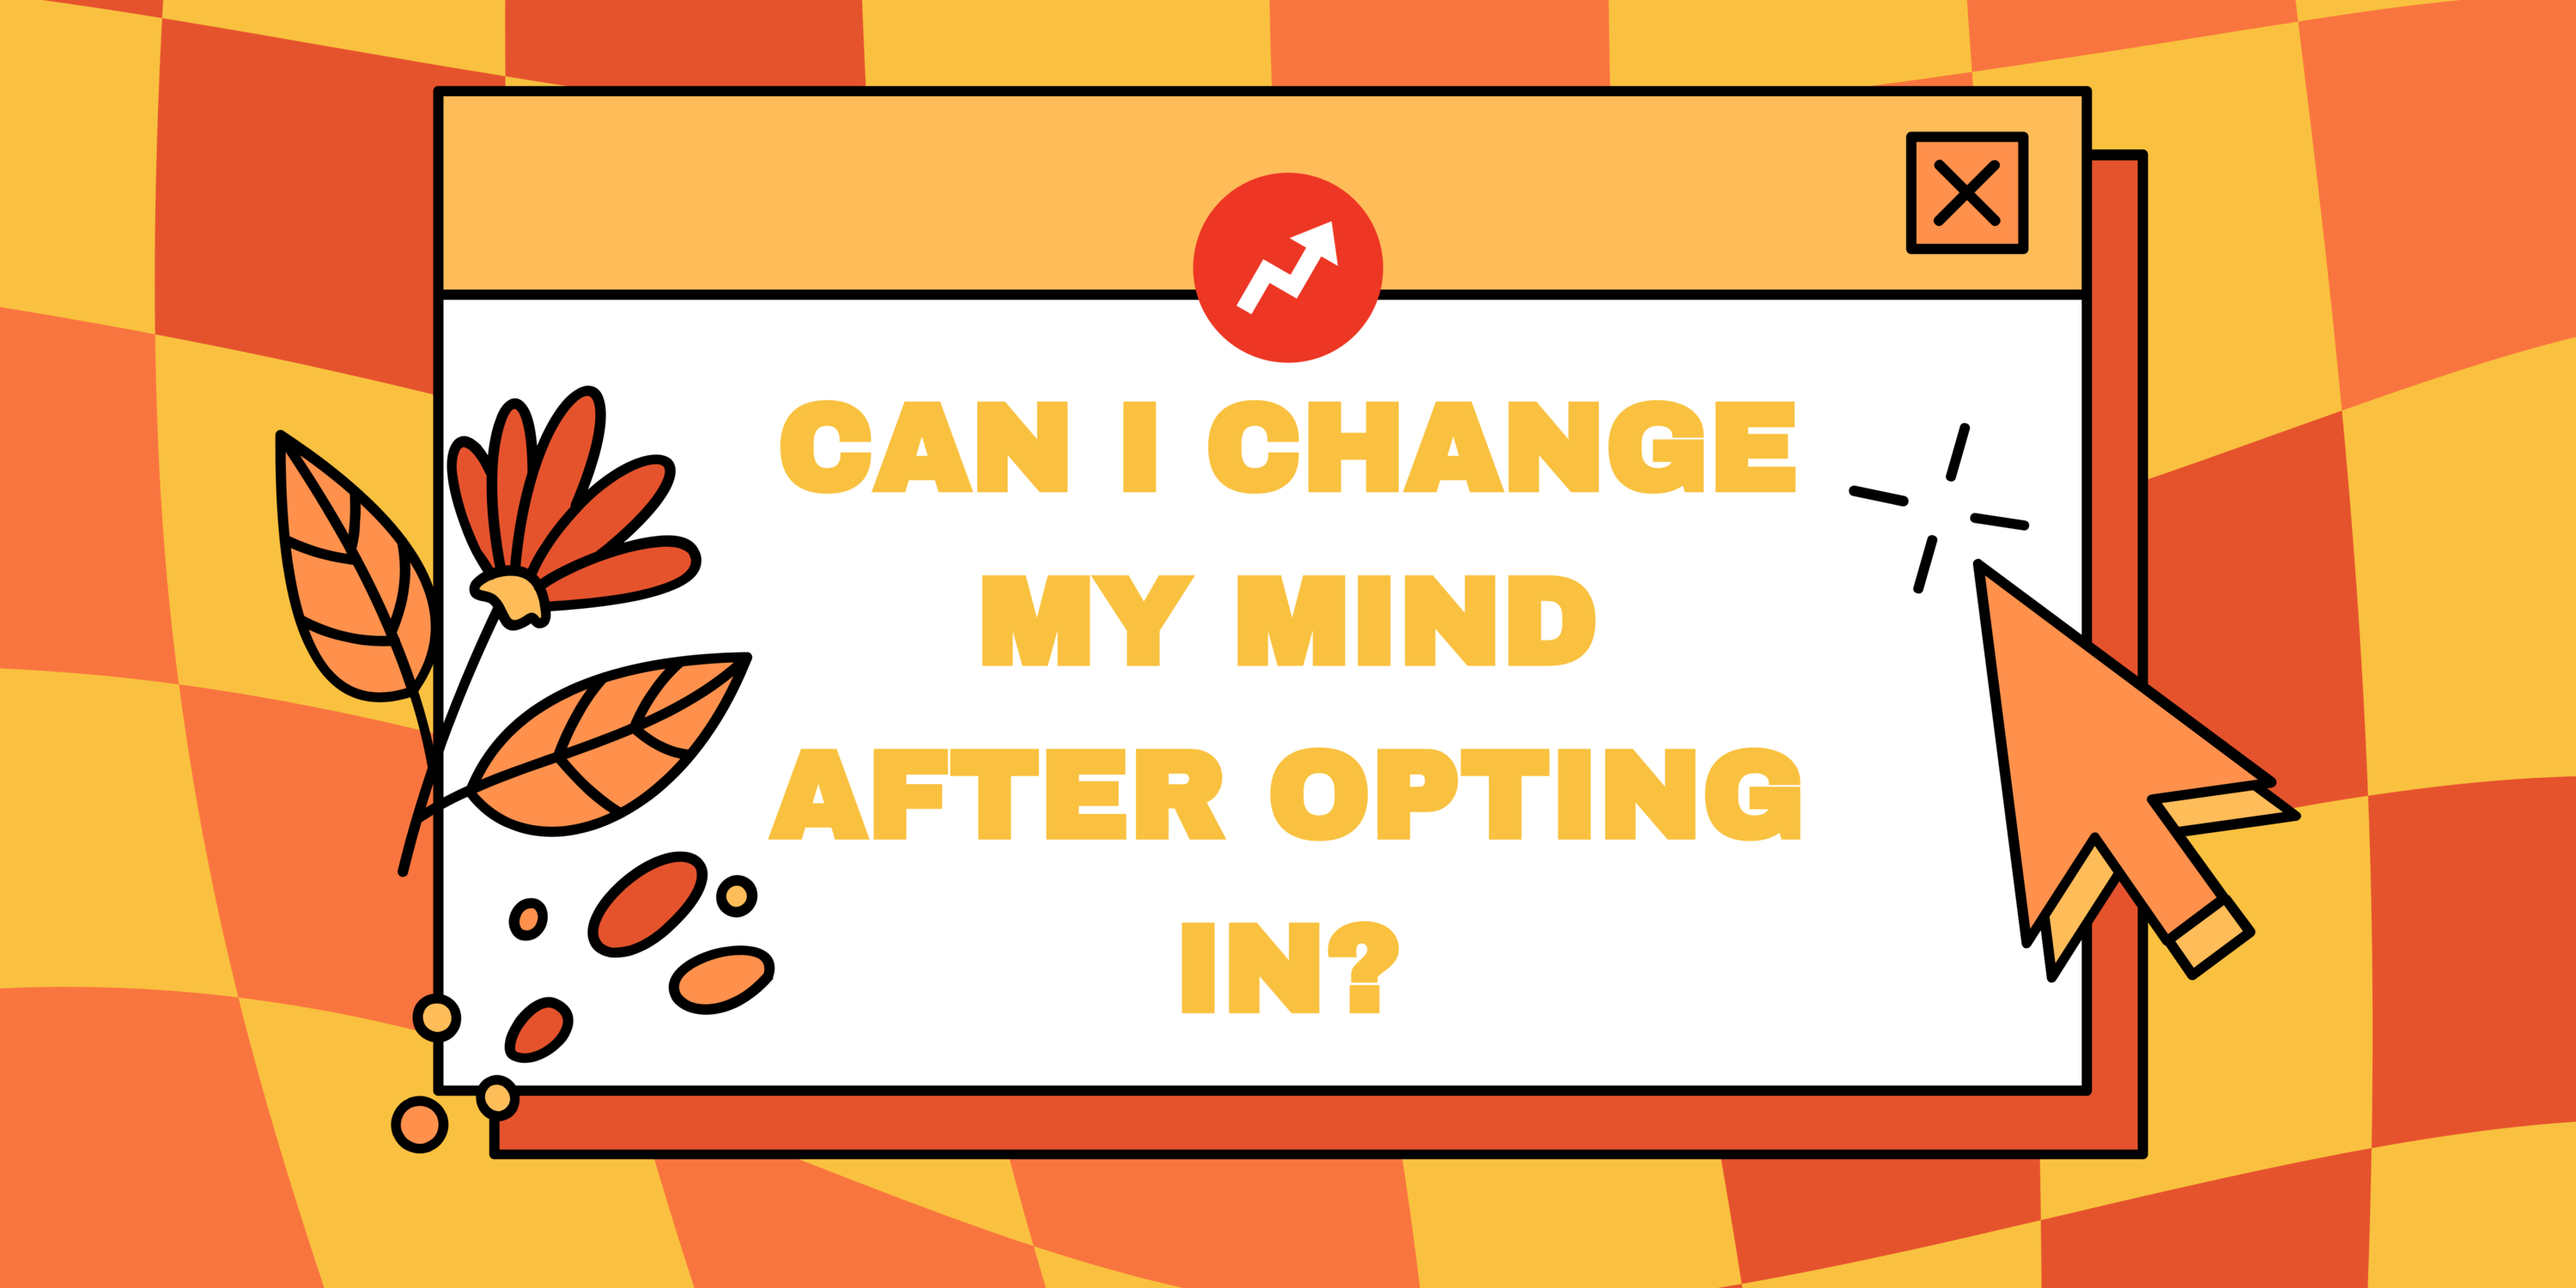 can i change my mind after opting in?